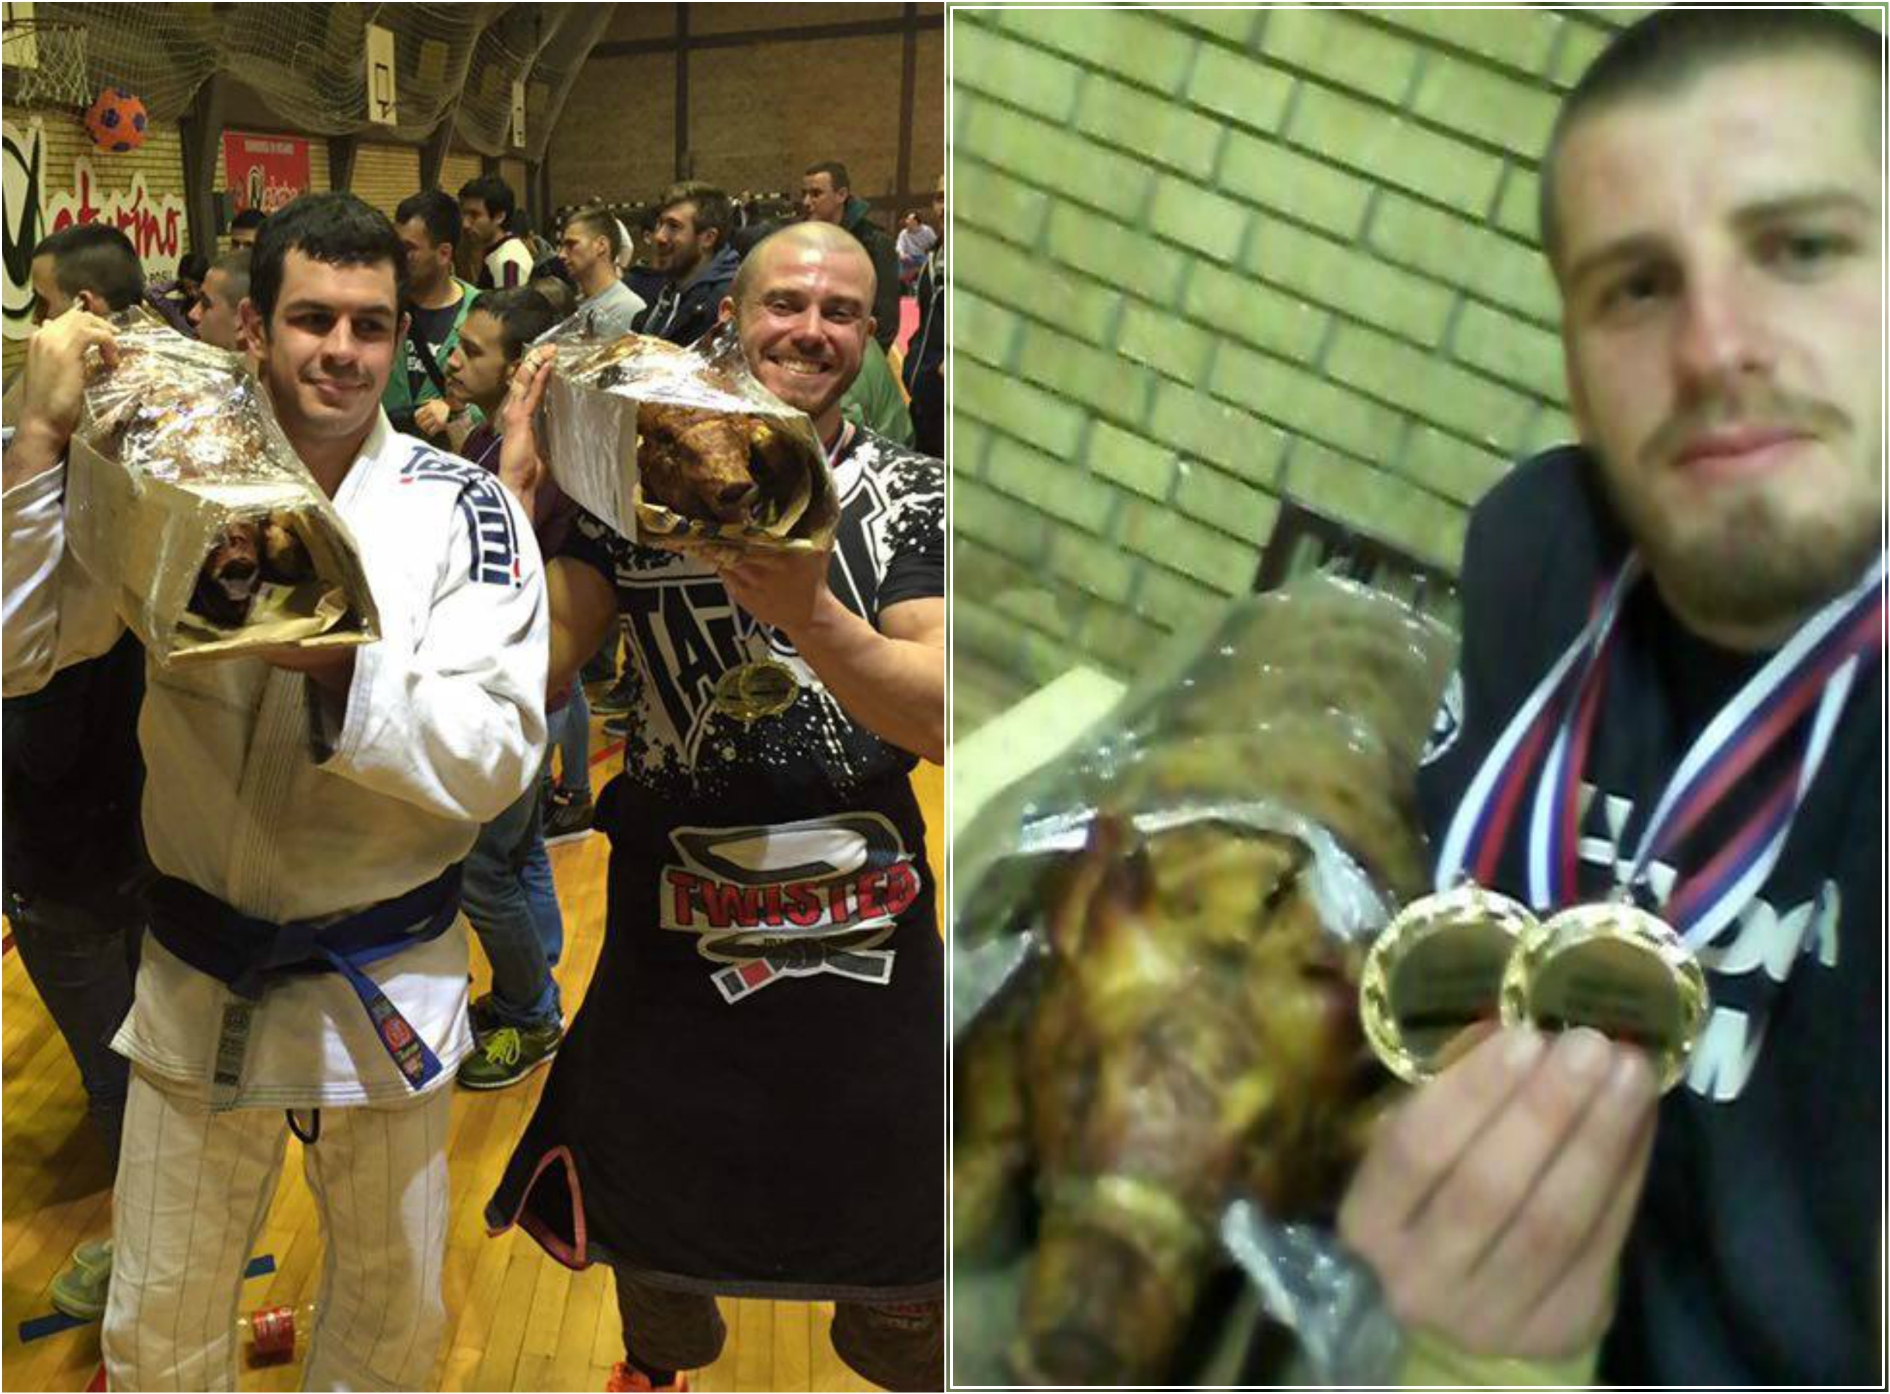 BJJ Tournament in Serbia Offers Roasted Pigs To Winners